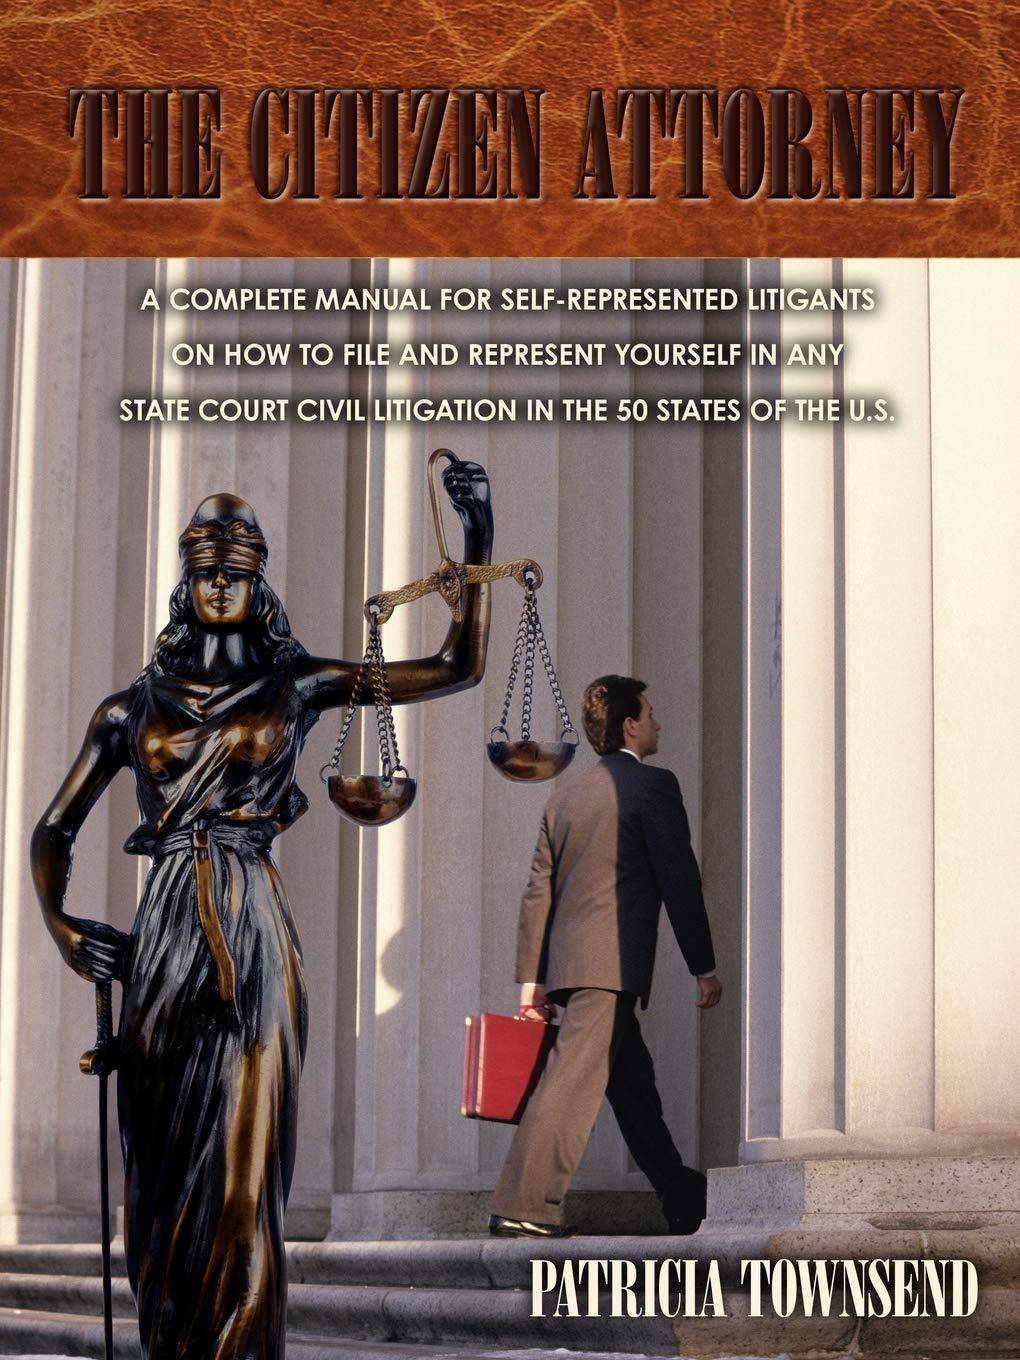 The Citizen Attorney: A Complete Manual for Self-Represented Litigants on How to File and Represent Yourself in Any State Court Civil Litiga - SureShot Books Publishing LLC